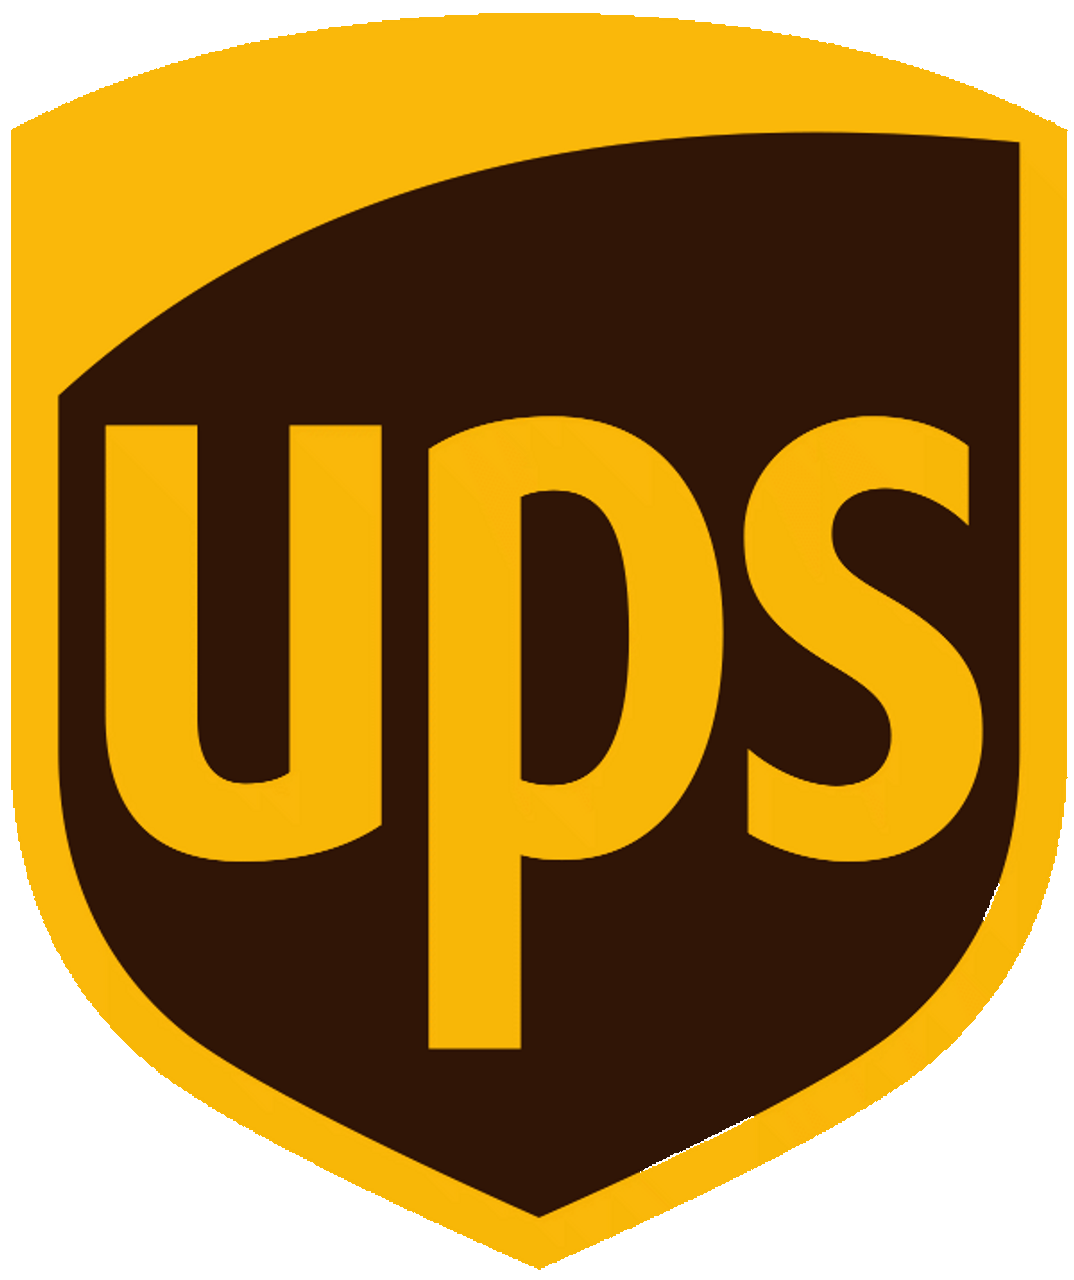 Shipped by UPS